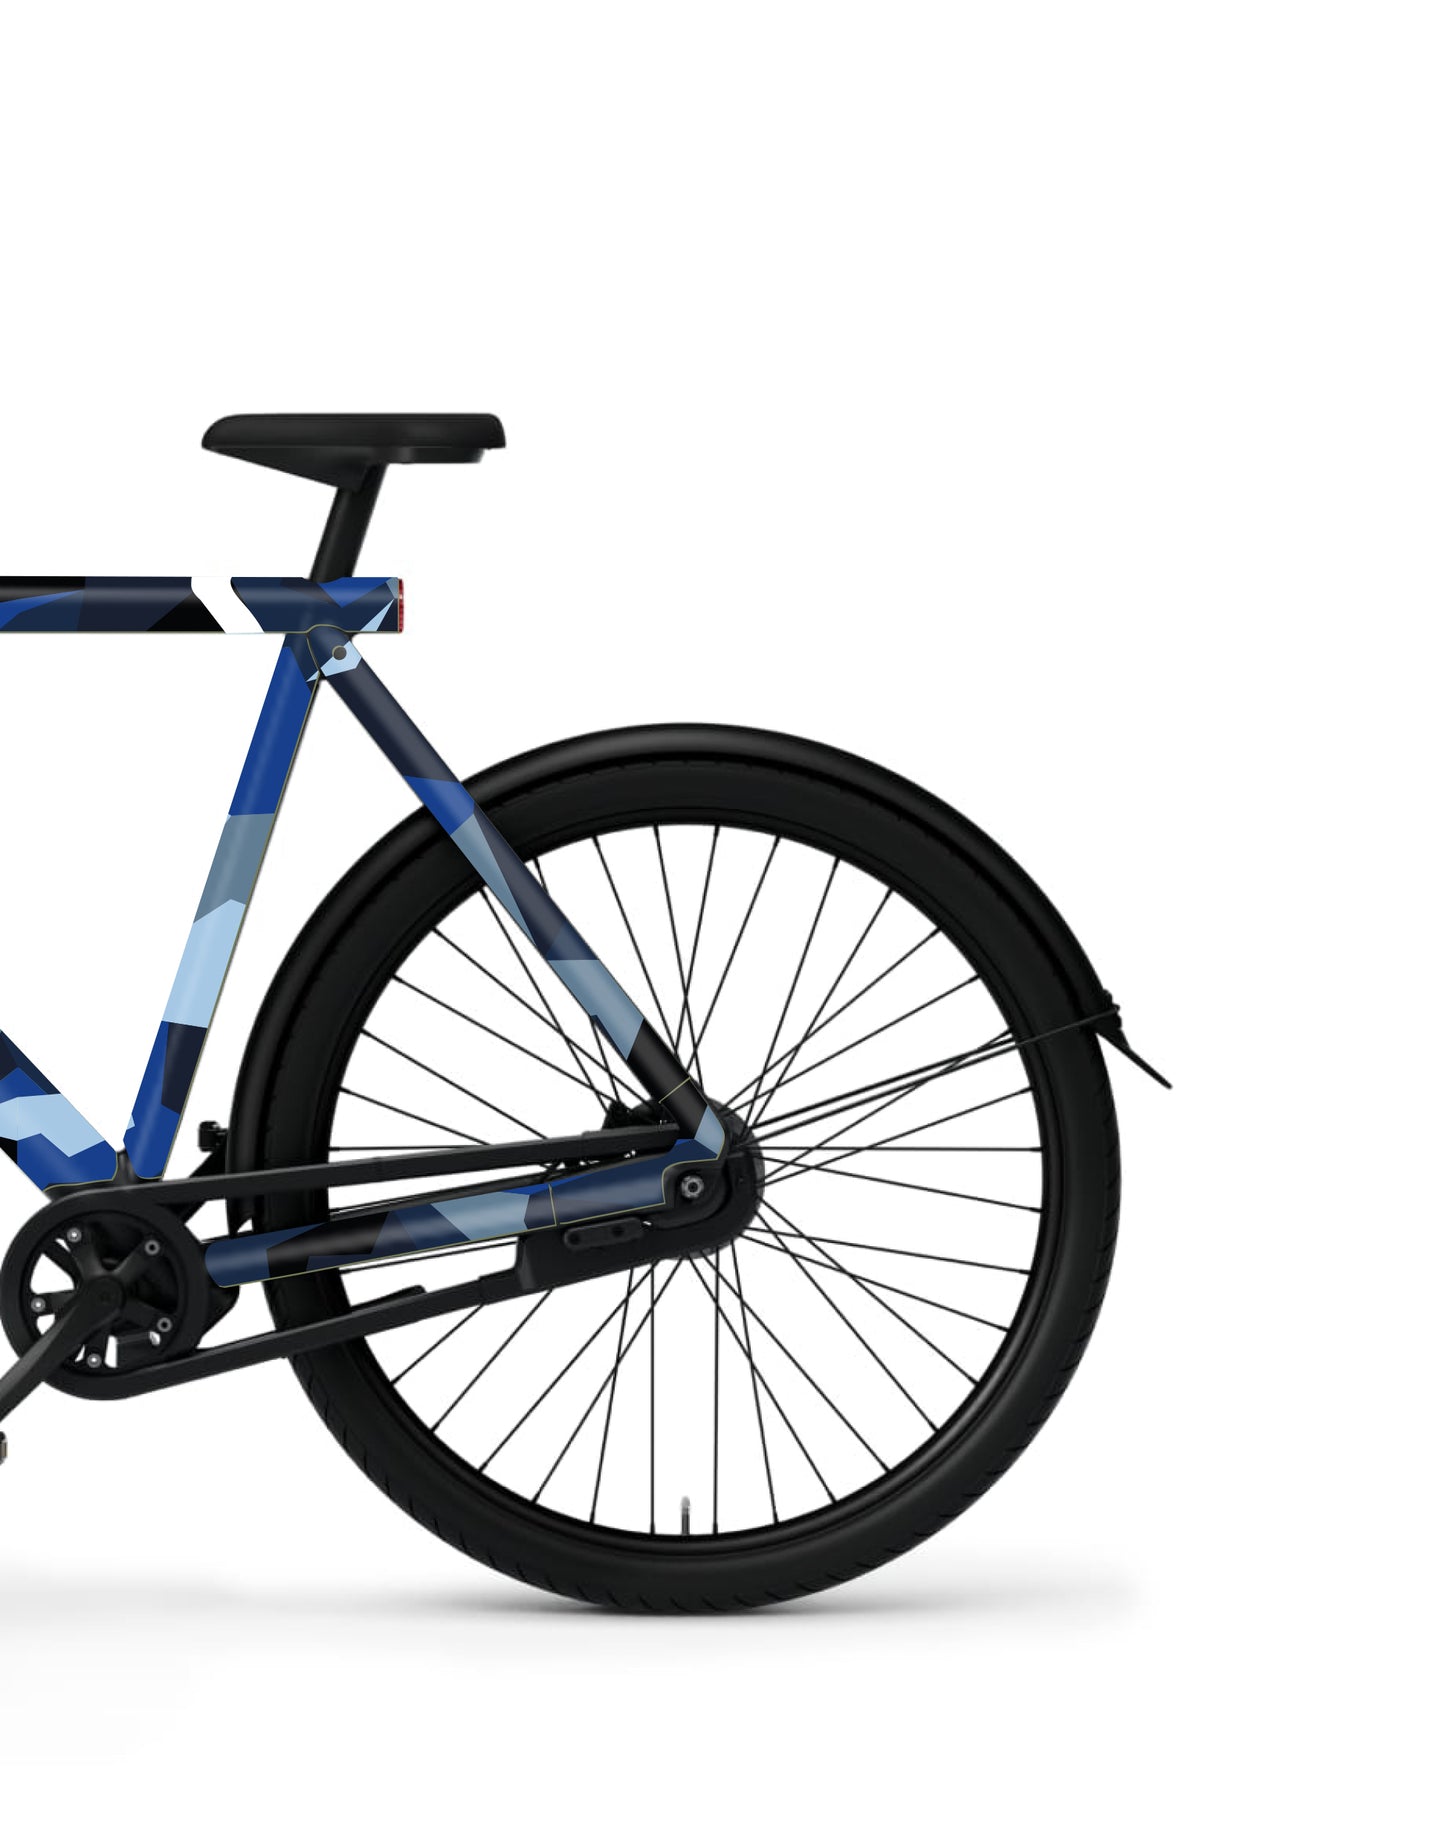 BLUE CAMO PROTECT KIT FOR VANMOOF S2/S3